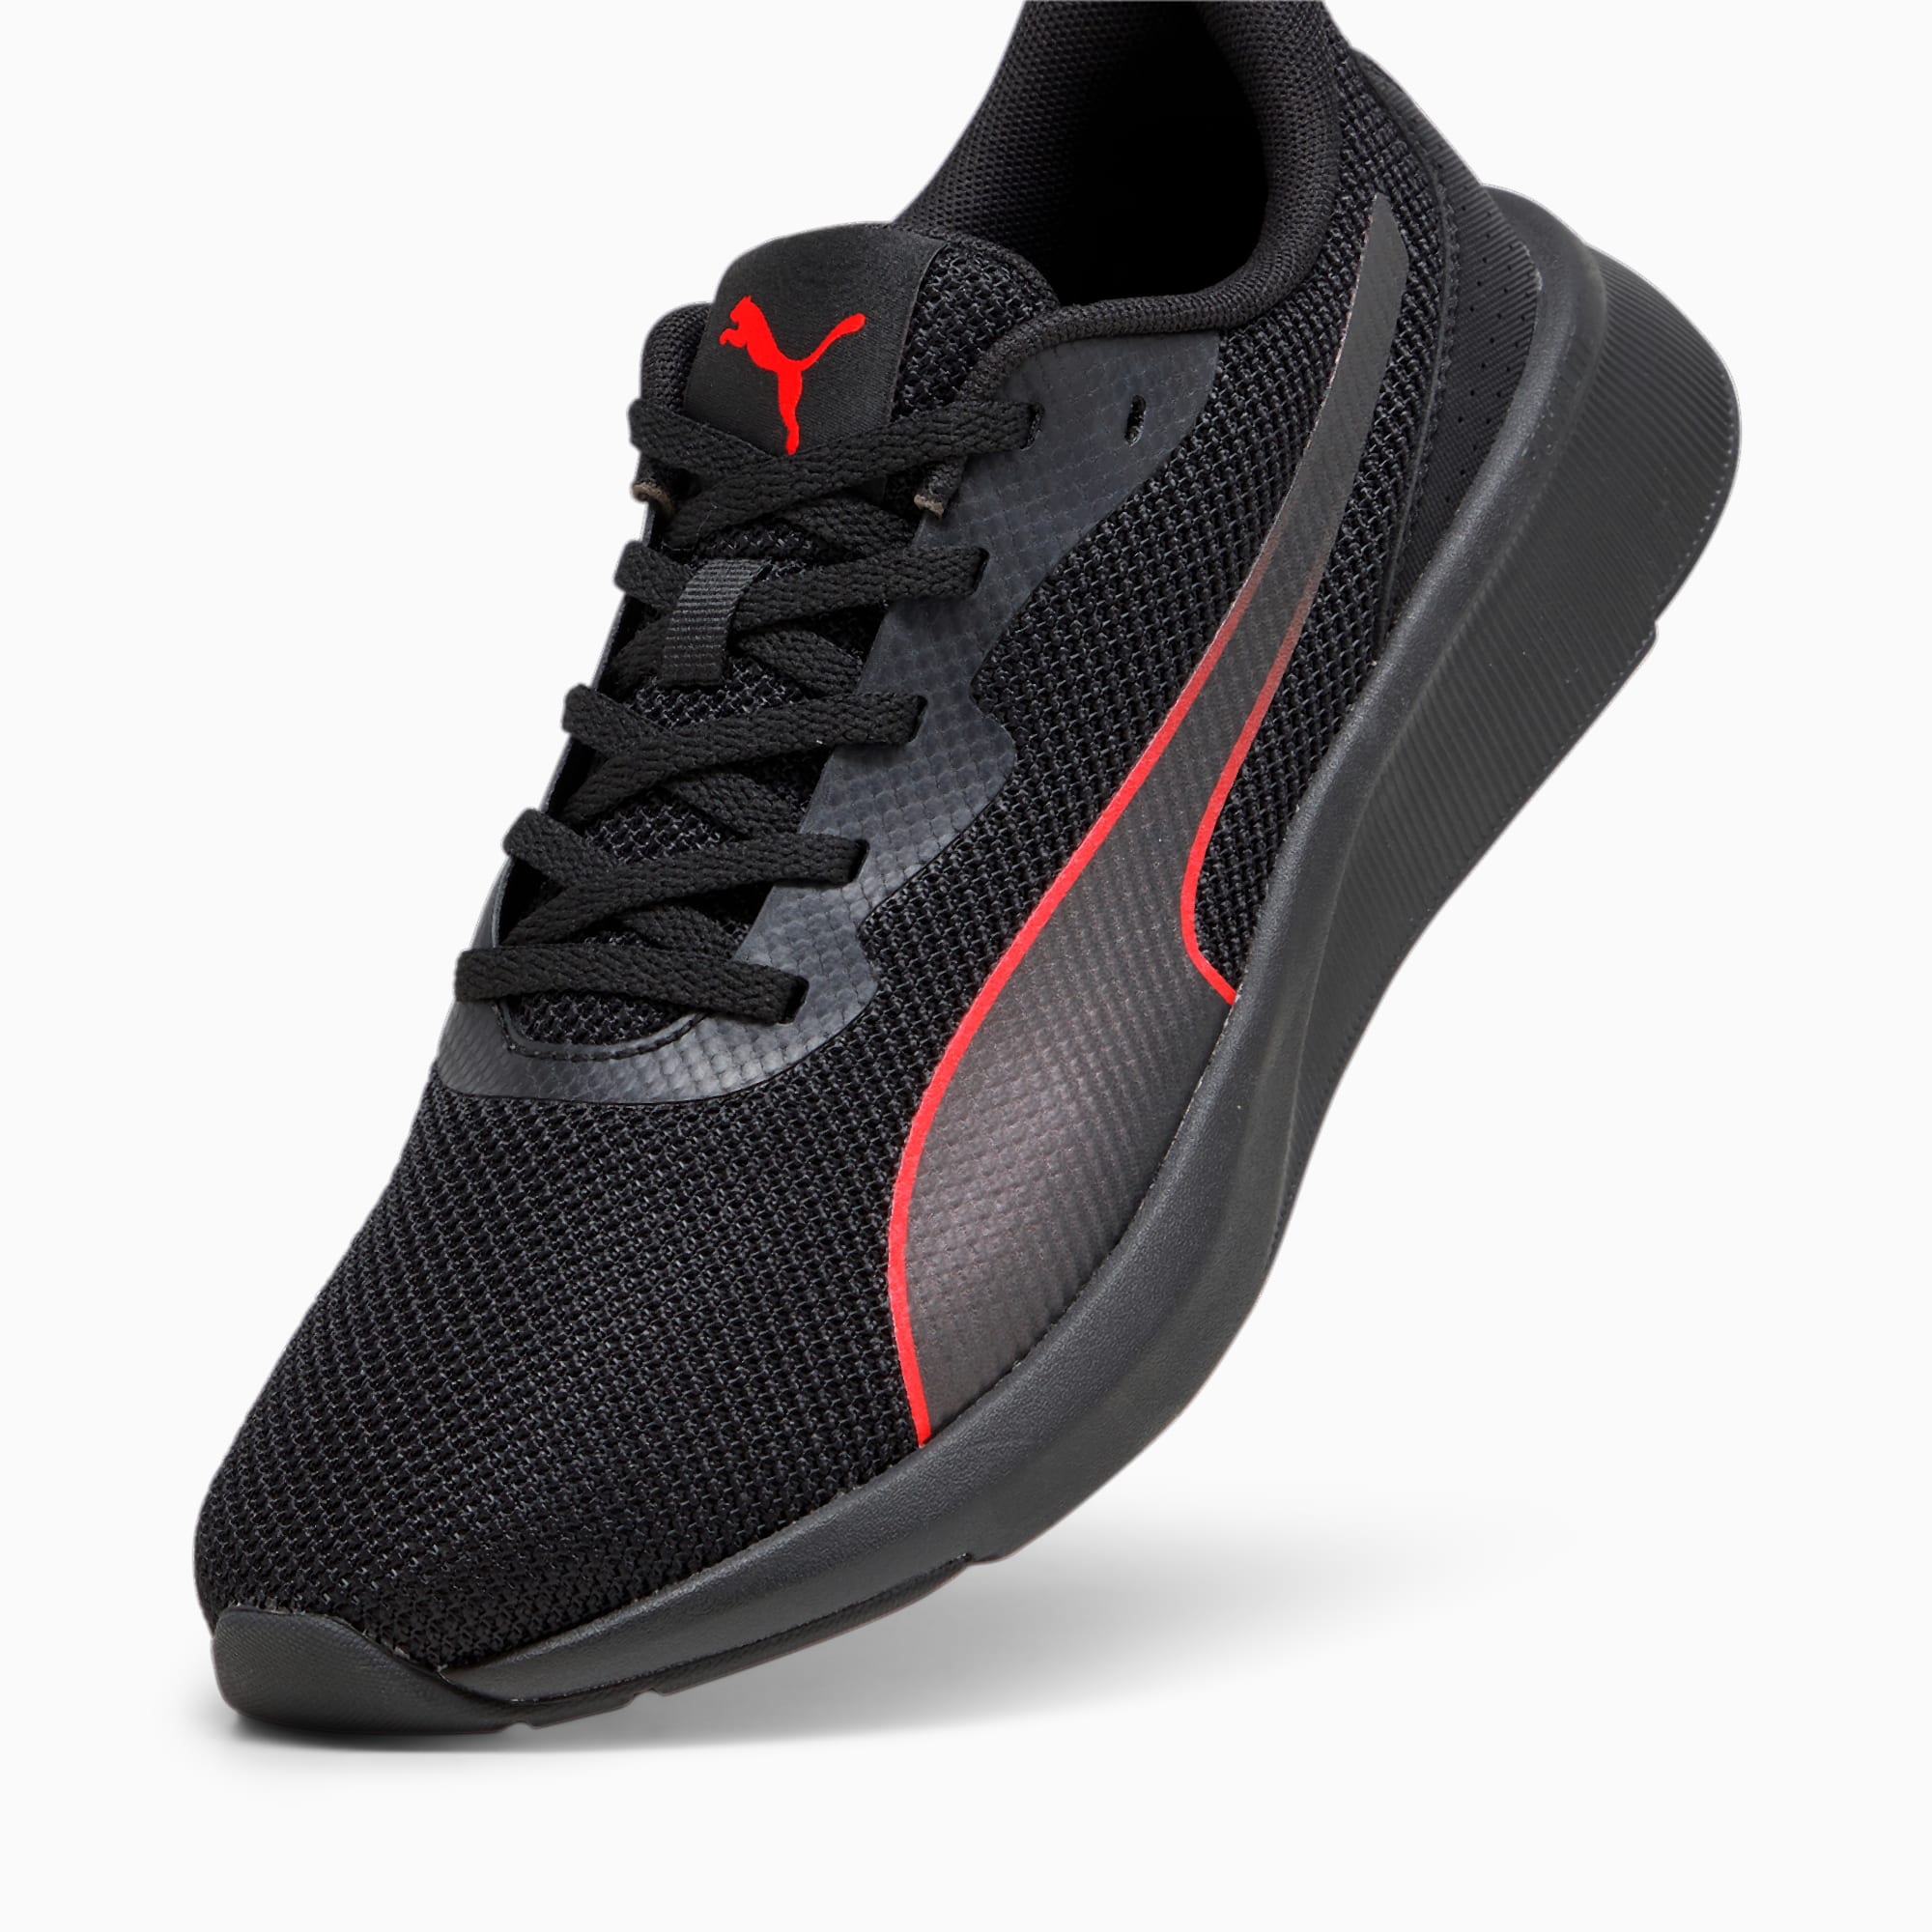 Men's PUMA Flyer Lite Mesh Running Shoe Sneakers, Black/For All Time Red, Size 35,5, Shoes